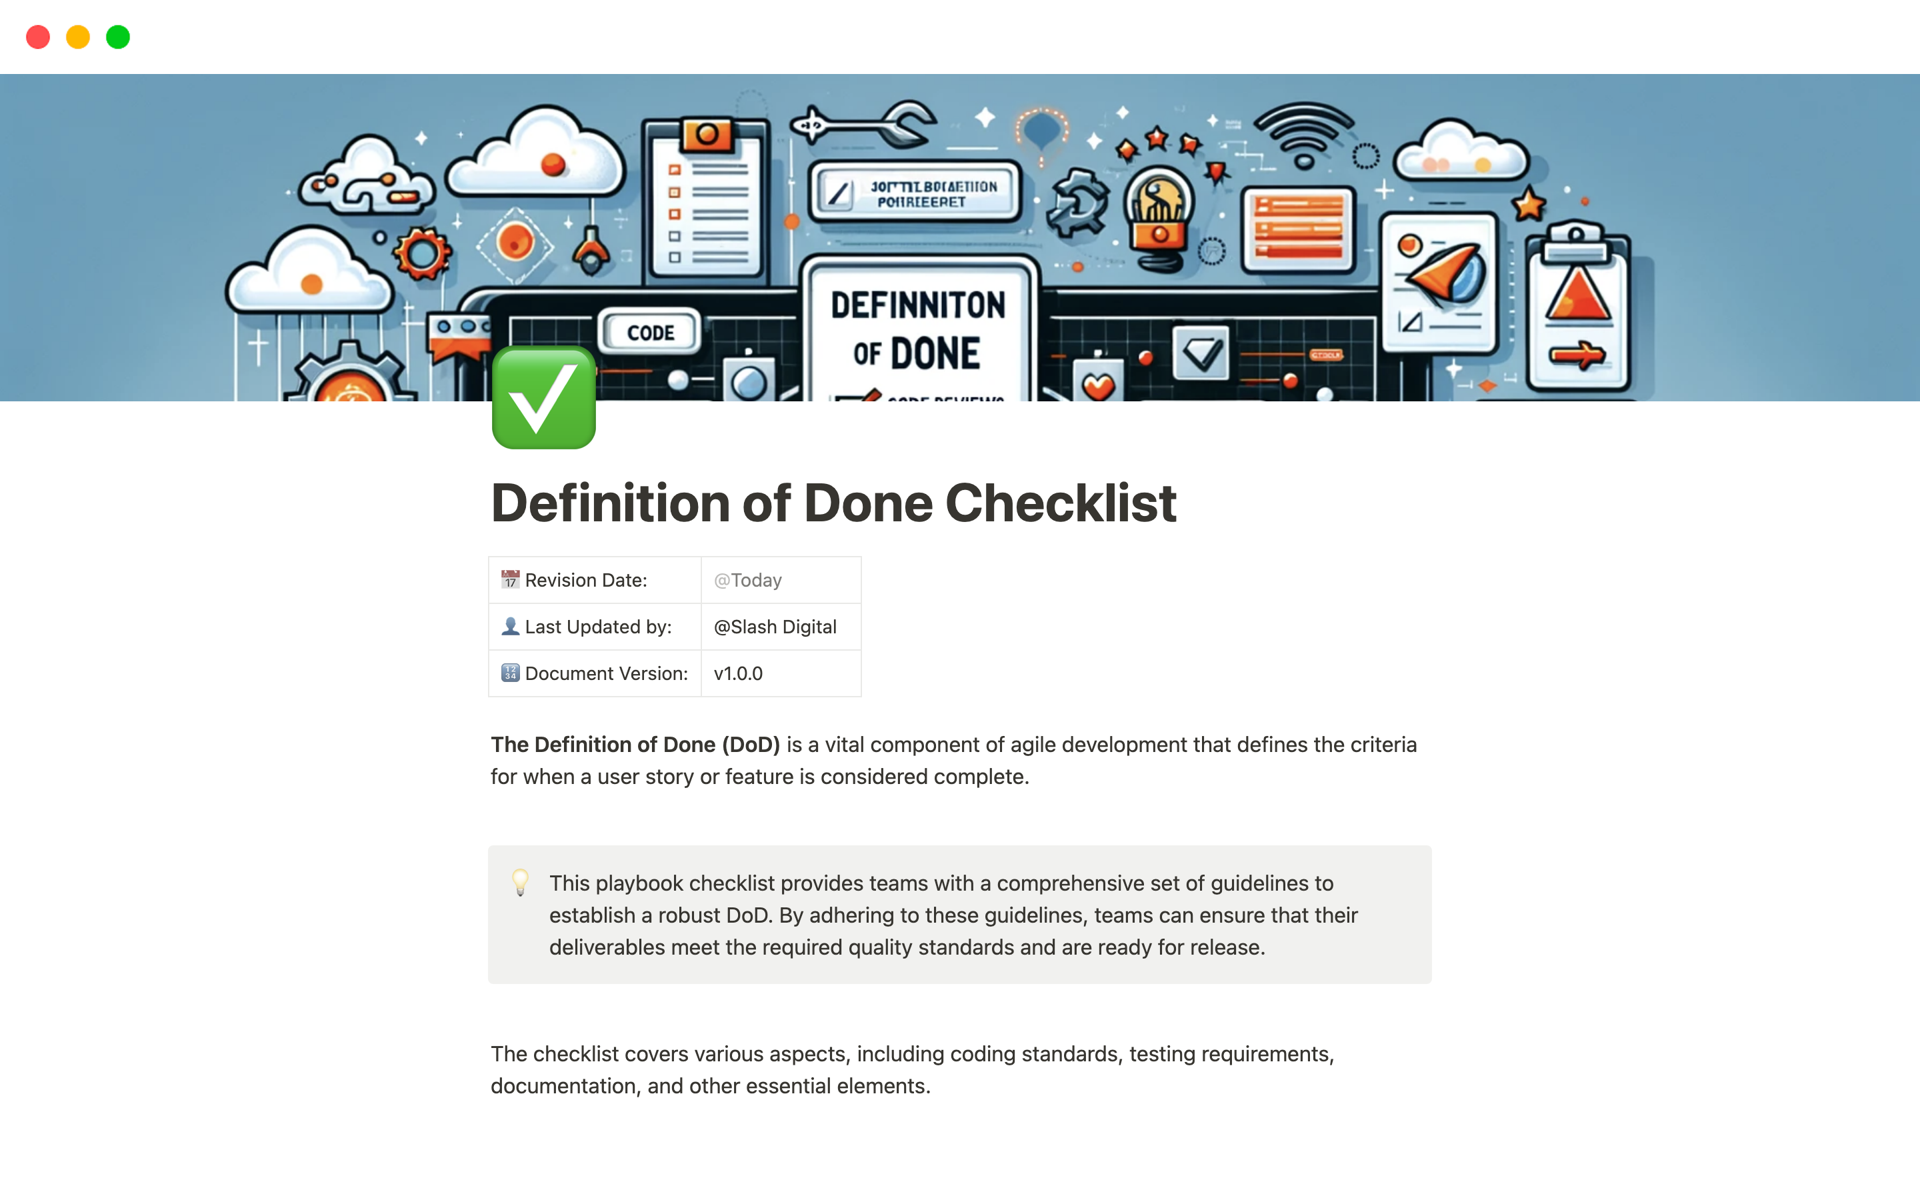 The Definition of Done (DoD) in agile development outlines criteria for considering a user story or feature complete. A playbook checklist provides detailed guidelines to help teams ensure their work meets quality standards and is ready for release.